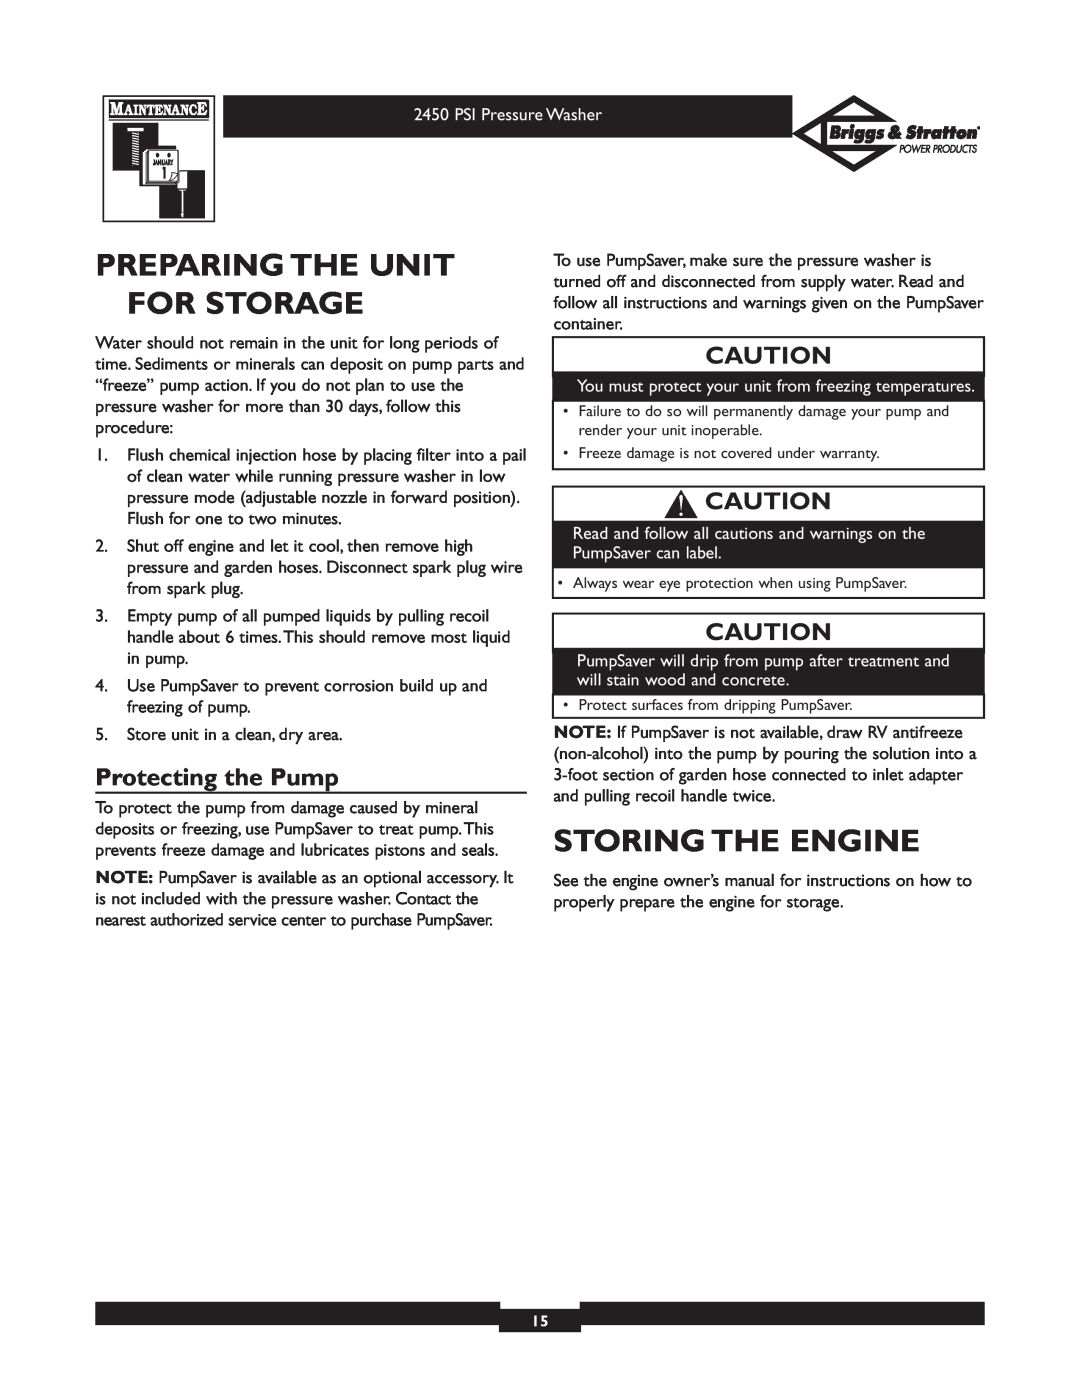 Briggs & Stratton 020219 owner manual Preparing The Unit For Storage, Storing The Engine, Protecting the Pump 